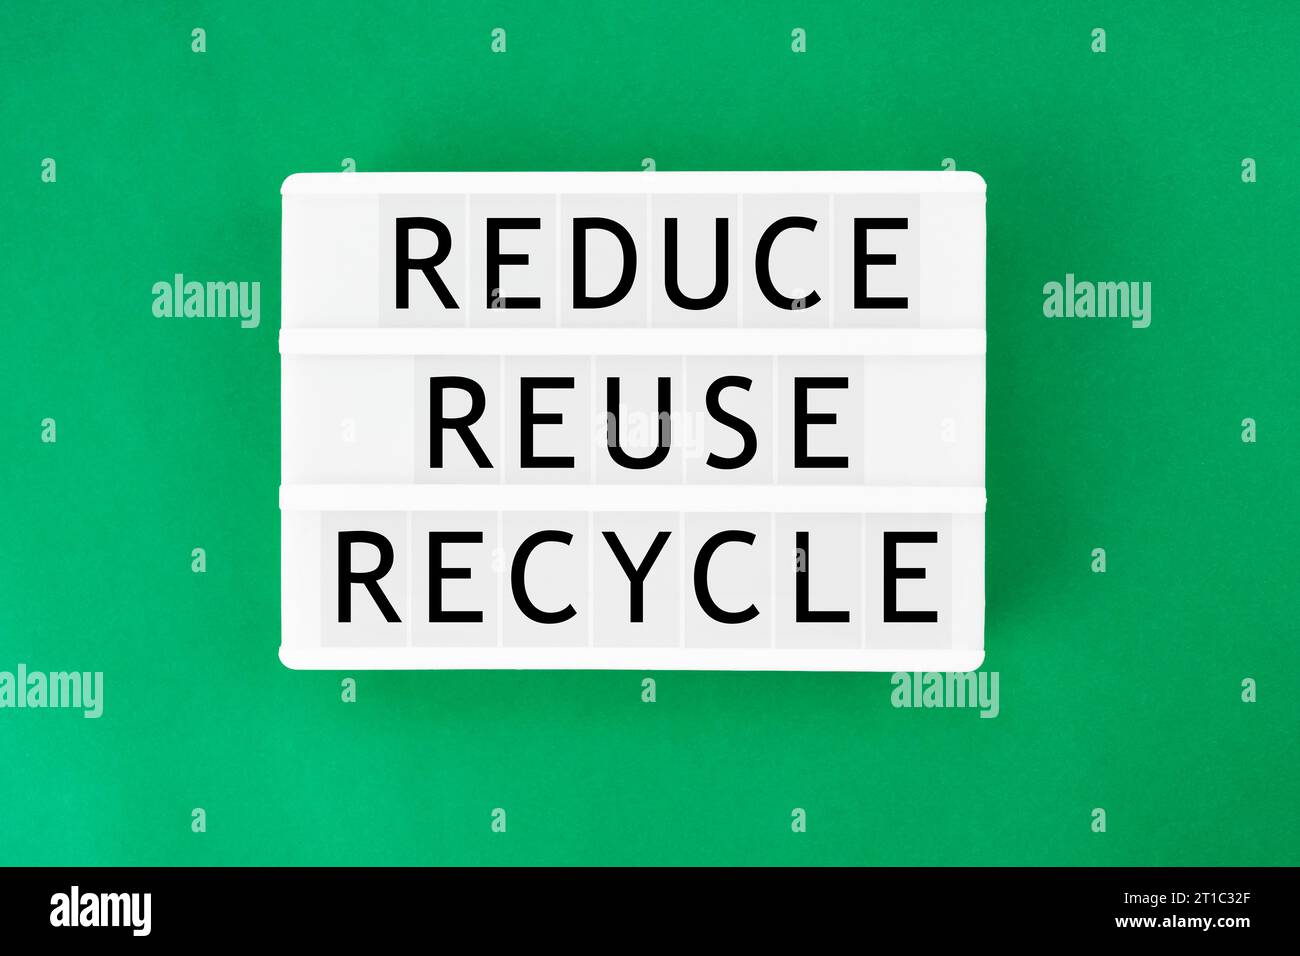 Plastic bag with Recycle sign logo and words REDUCE REUSE RECYCLE on white  blackground, eco friendly concept Stock Photo - Alamy